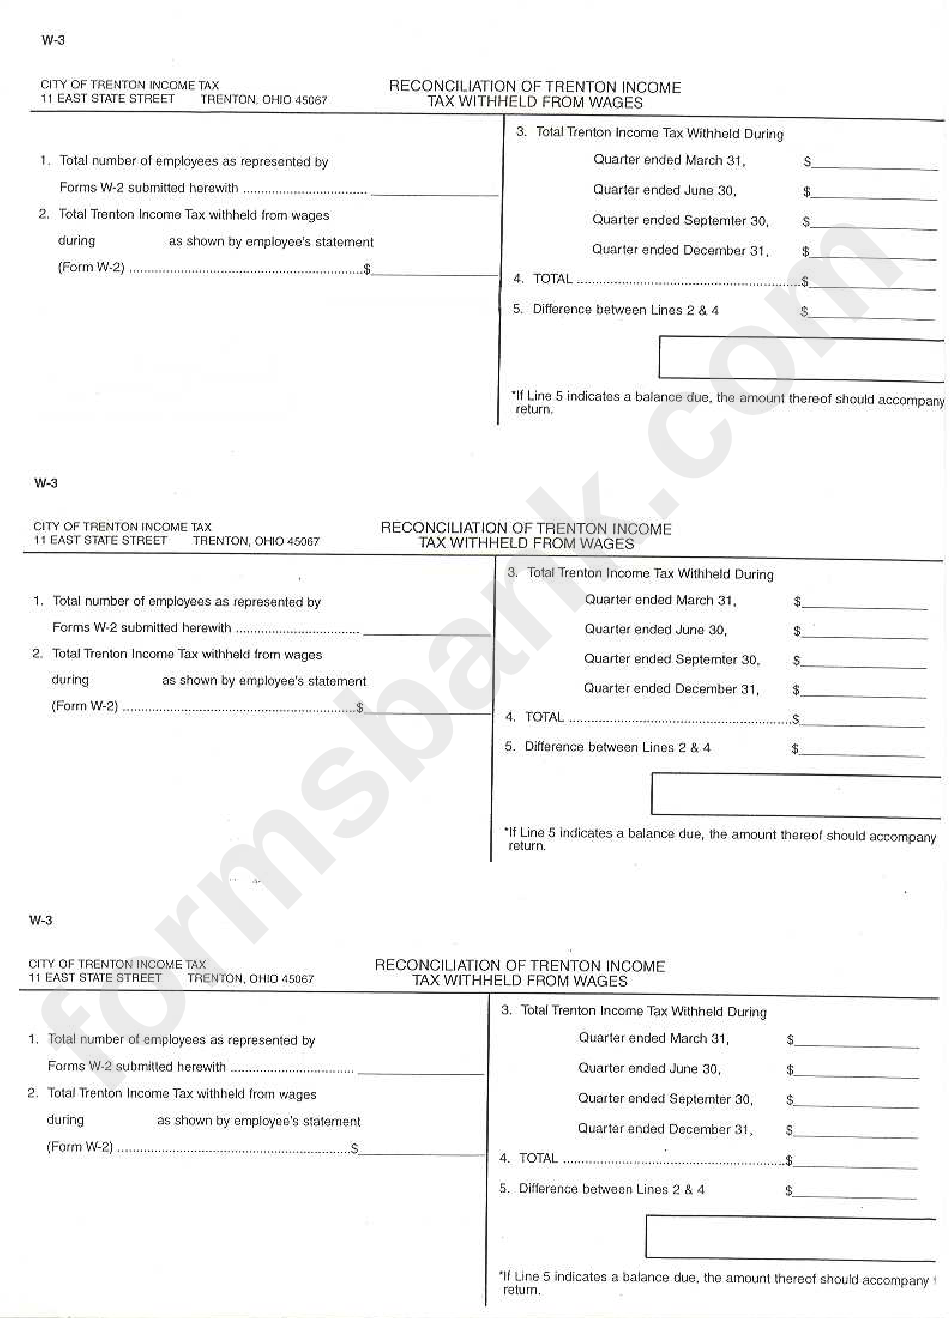 Form W-3 - Reconciliation Of Trenton Income Tax Withheld From Wages - State Of Ohio